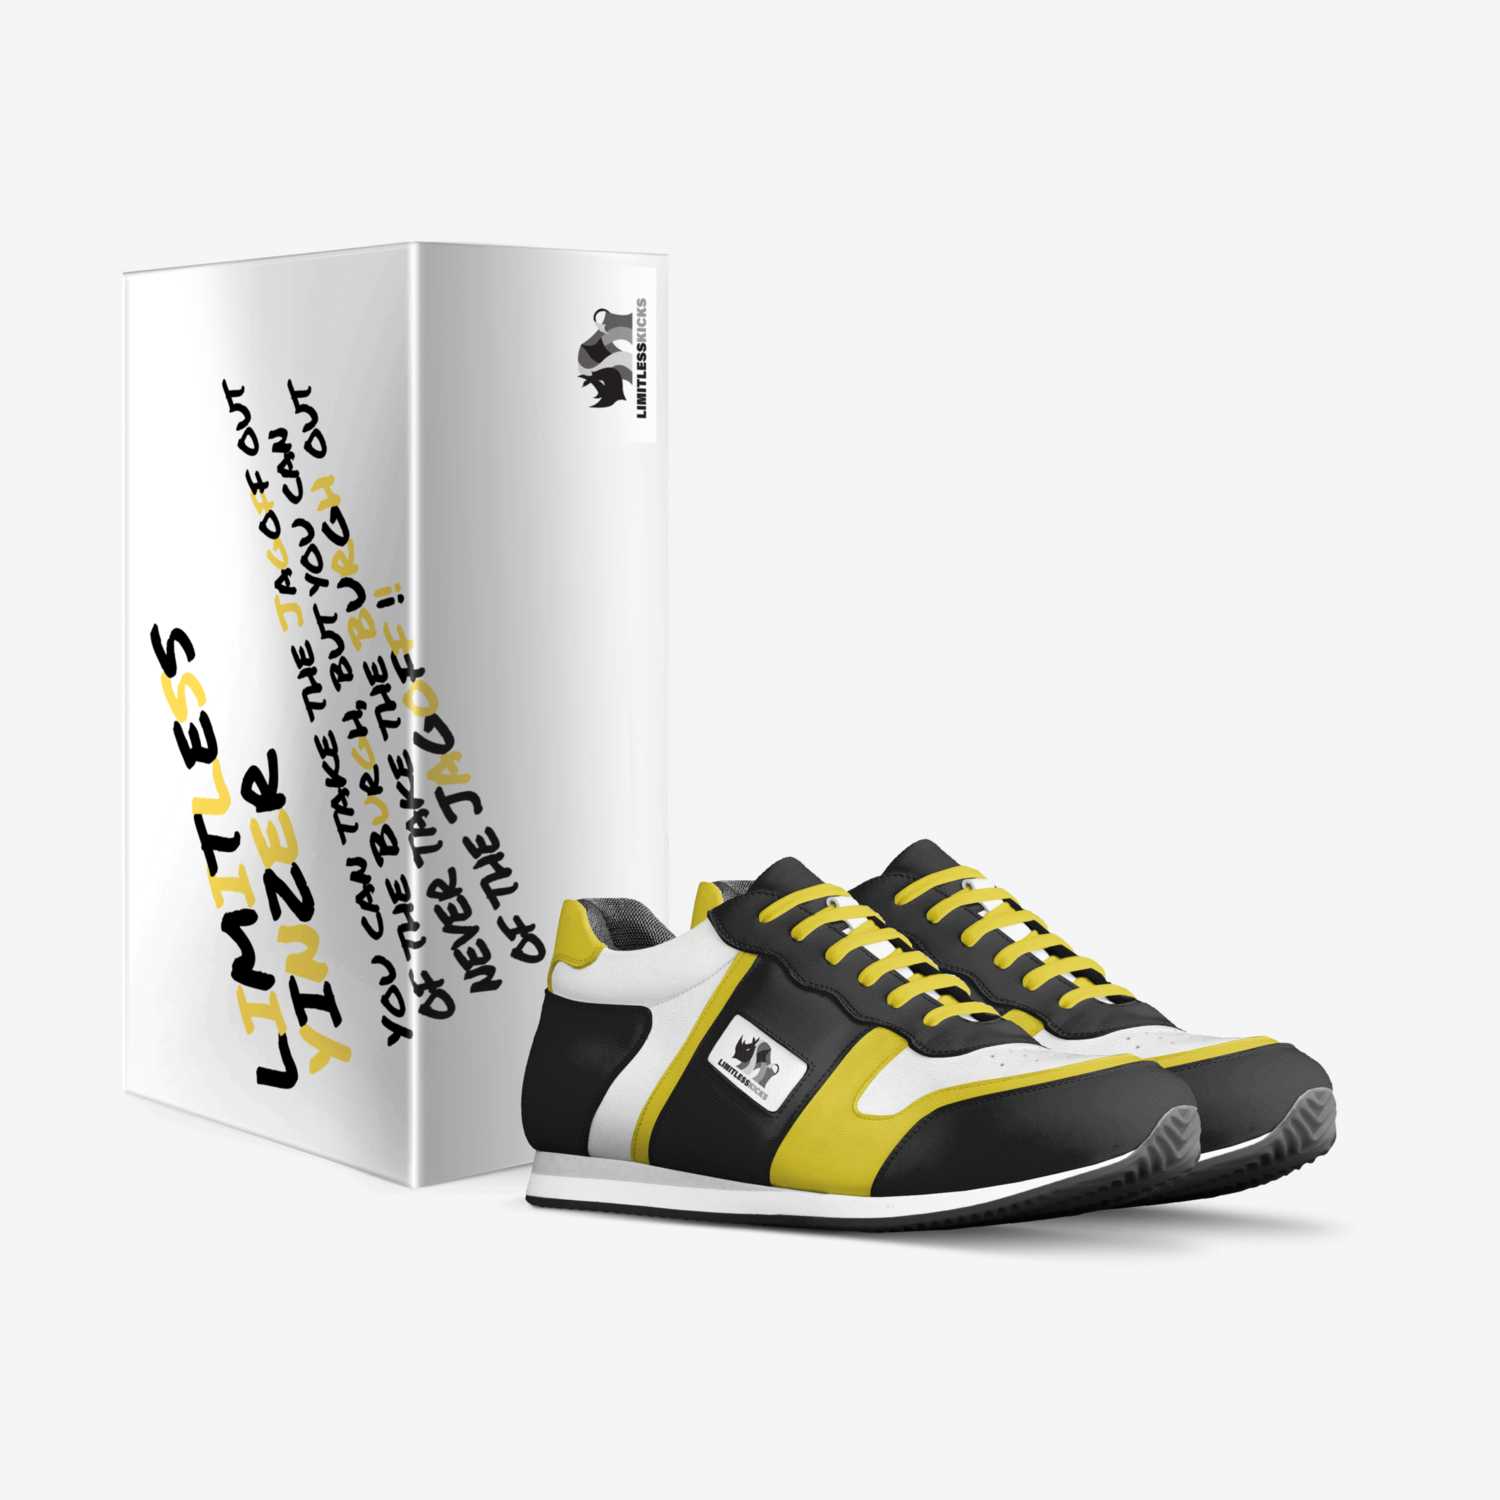 Limitless Yinzer custom made in Italy shoes by John Marchese | Box view